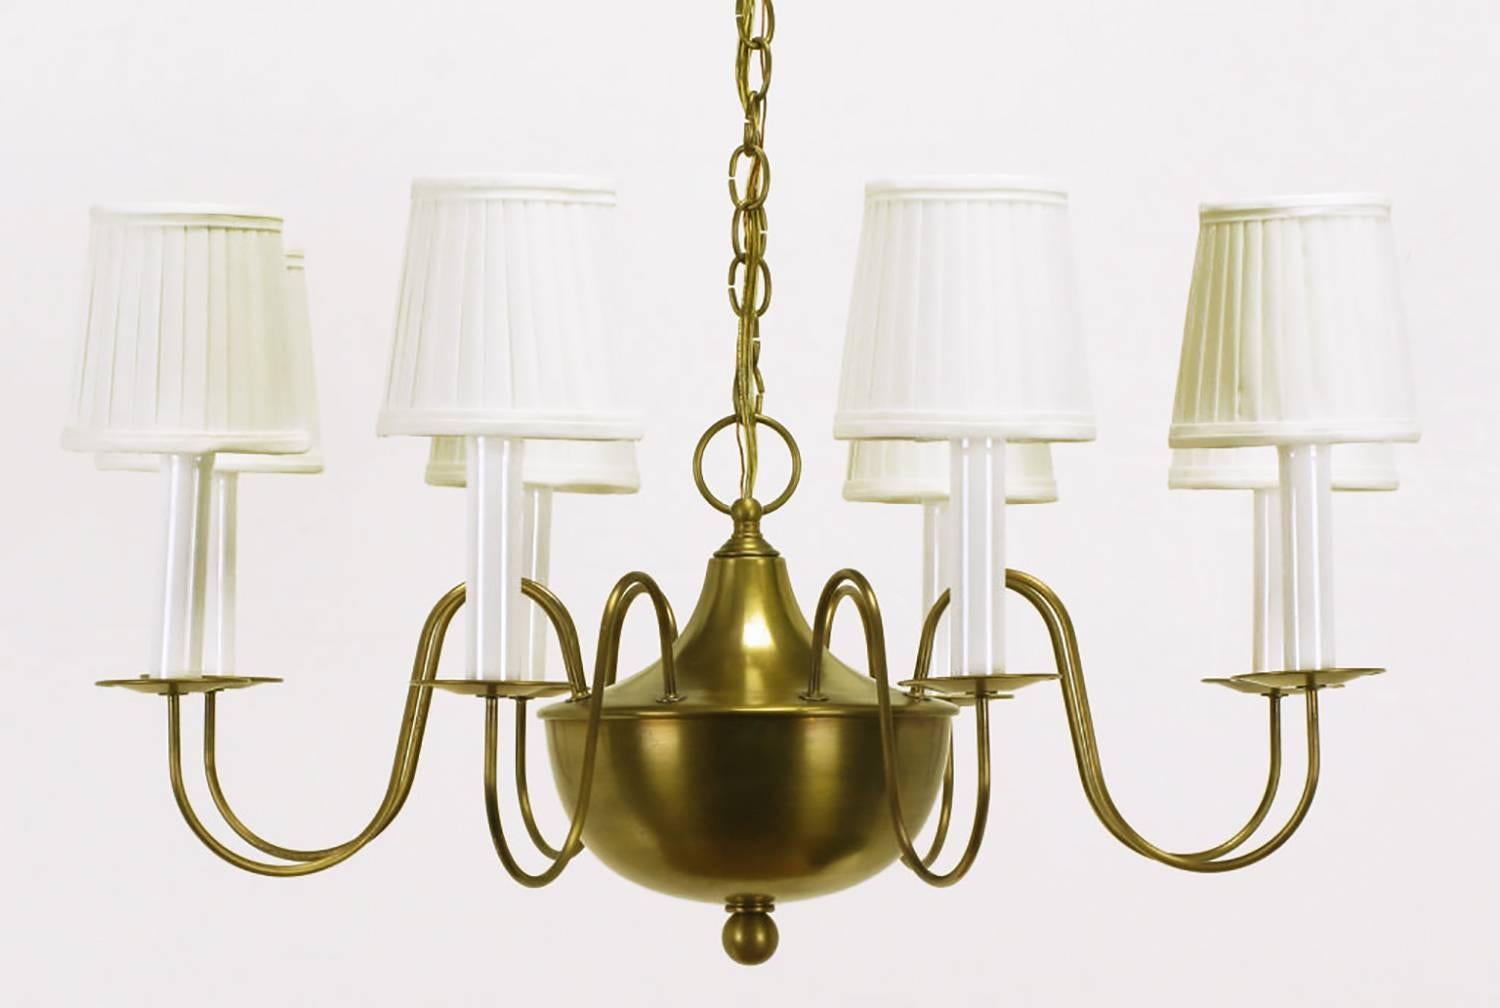 Very well designed and finely constructed spun brass bowl eight-arm chandelier. Nods to French Regency styling with the slender brass S shaped arms with petite disc bobeches, spun brass bowl with flanged cap and large closed ringed finial.
Drop is